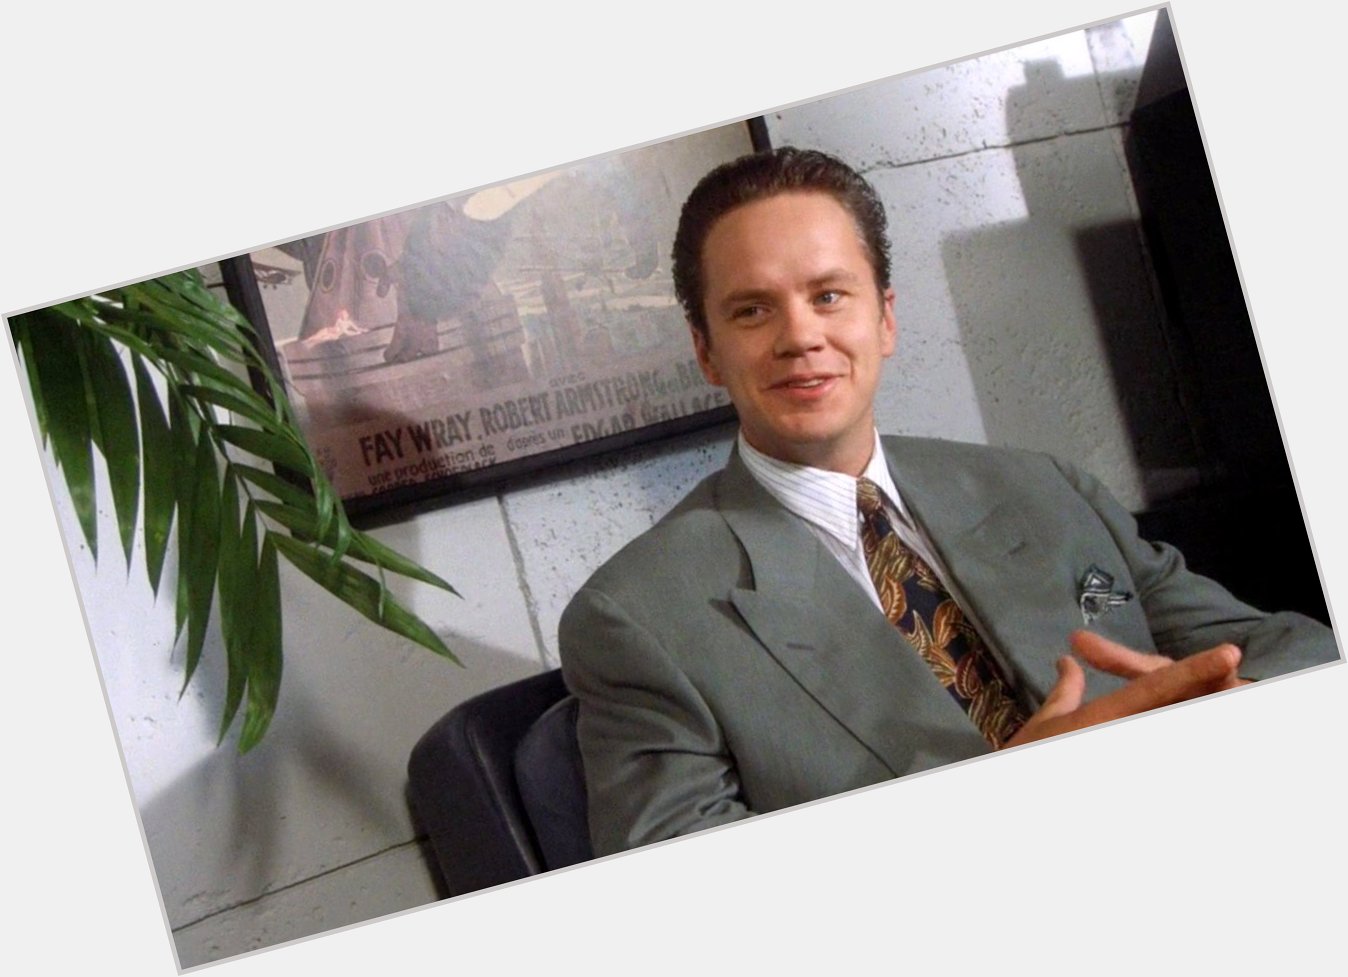 Happy birthday Tim Robbins. He s been consistently good, but he was at his best in The player IMHO. 